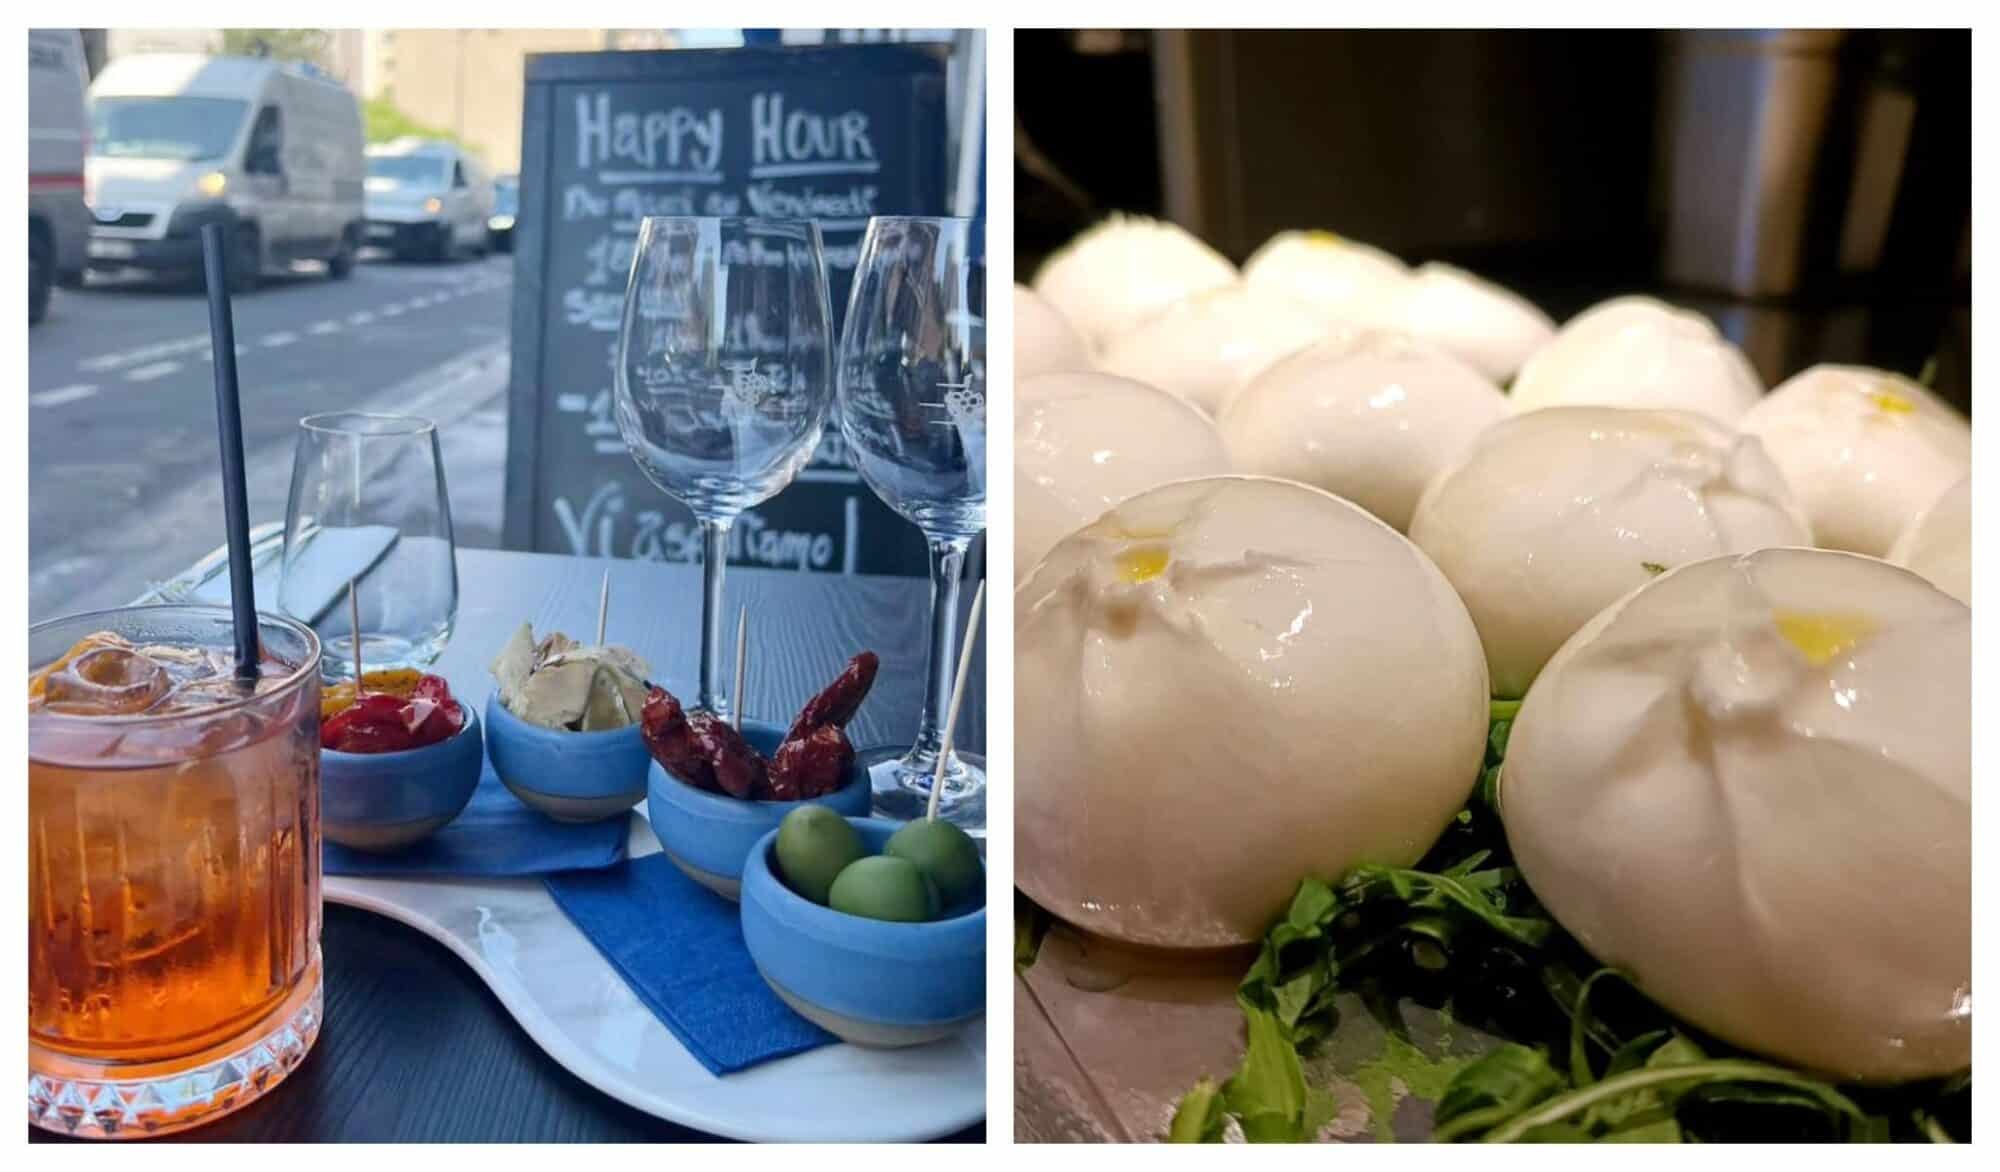 left: a table with two wine glasses and aperitif items with a sign saying Happy Hour at Guillaume Grasso; balls of Mozzarella on a wooden board with some rocket leaves to the side.